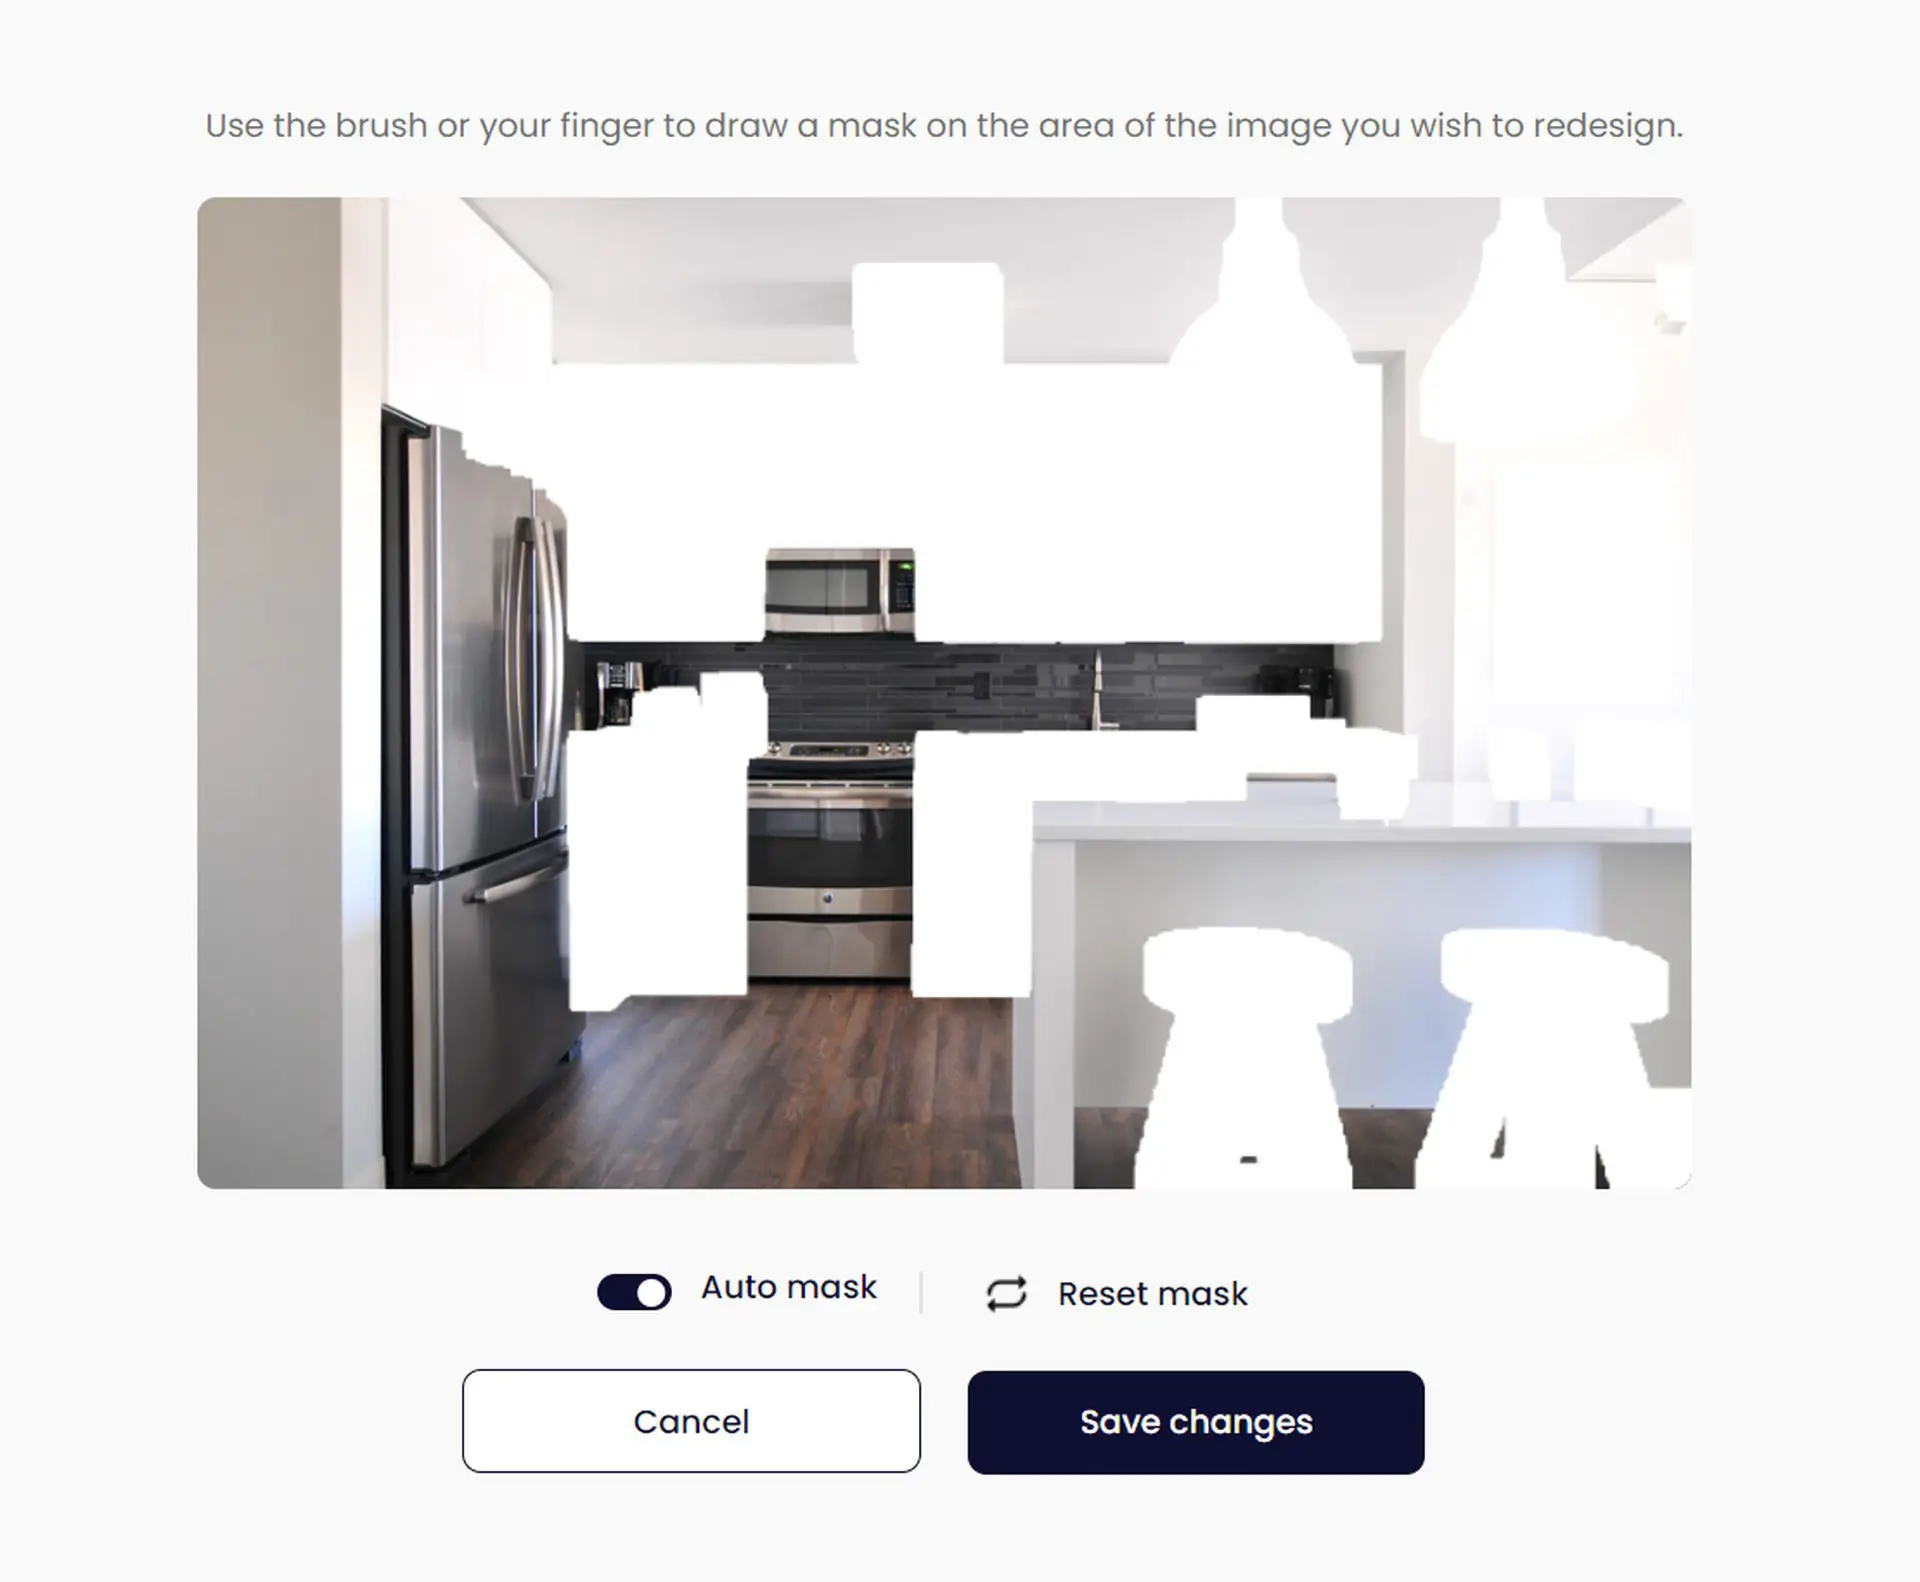 Reimagine Home AI wants to redesign your home